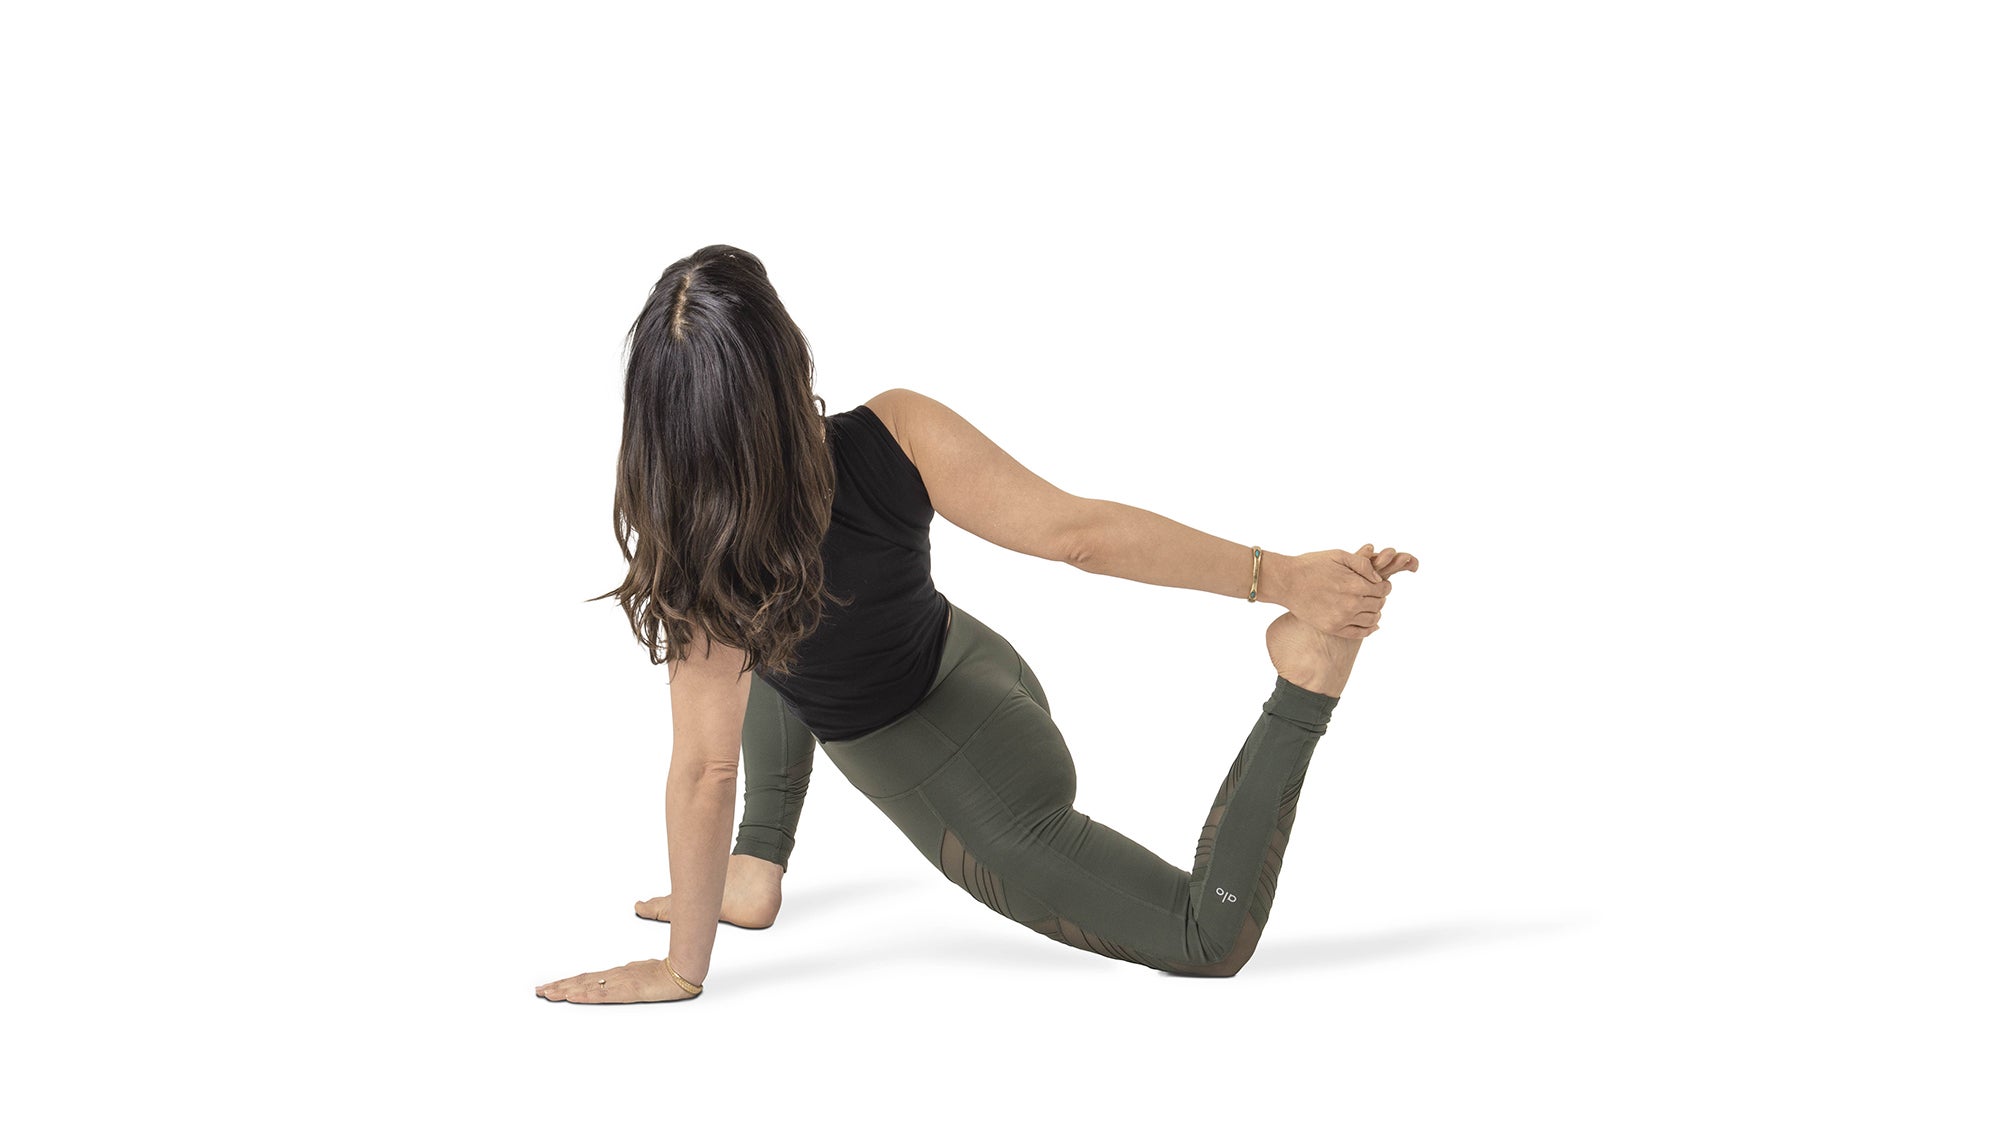 Yoga Poses By Benefit: How Certain Poses Can Alleviate Ailments